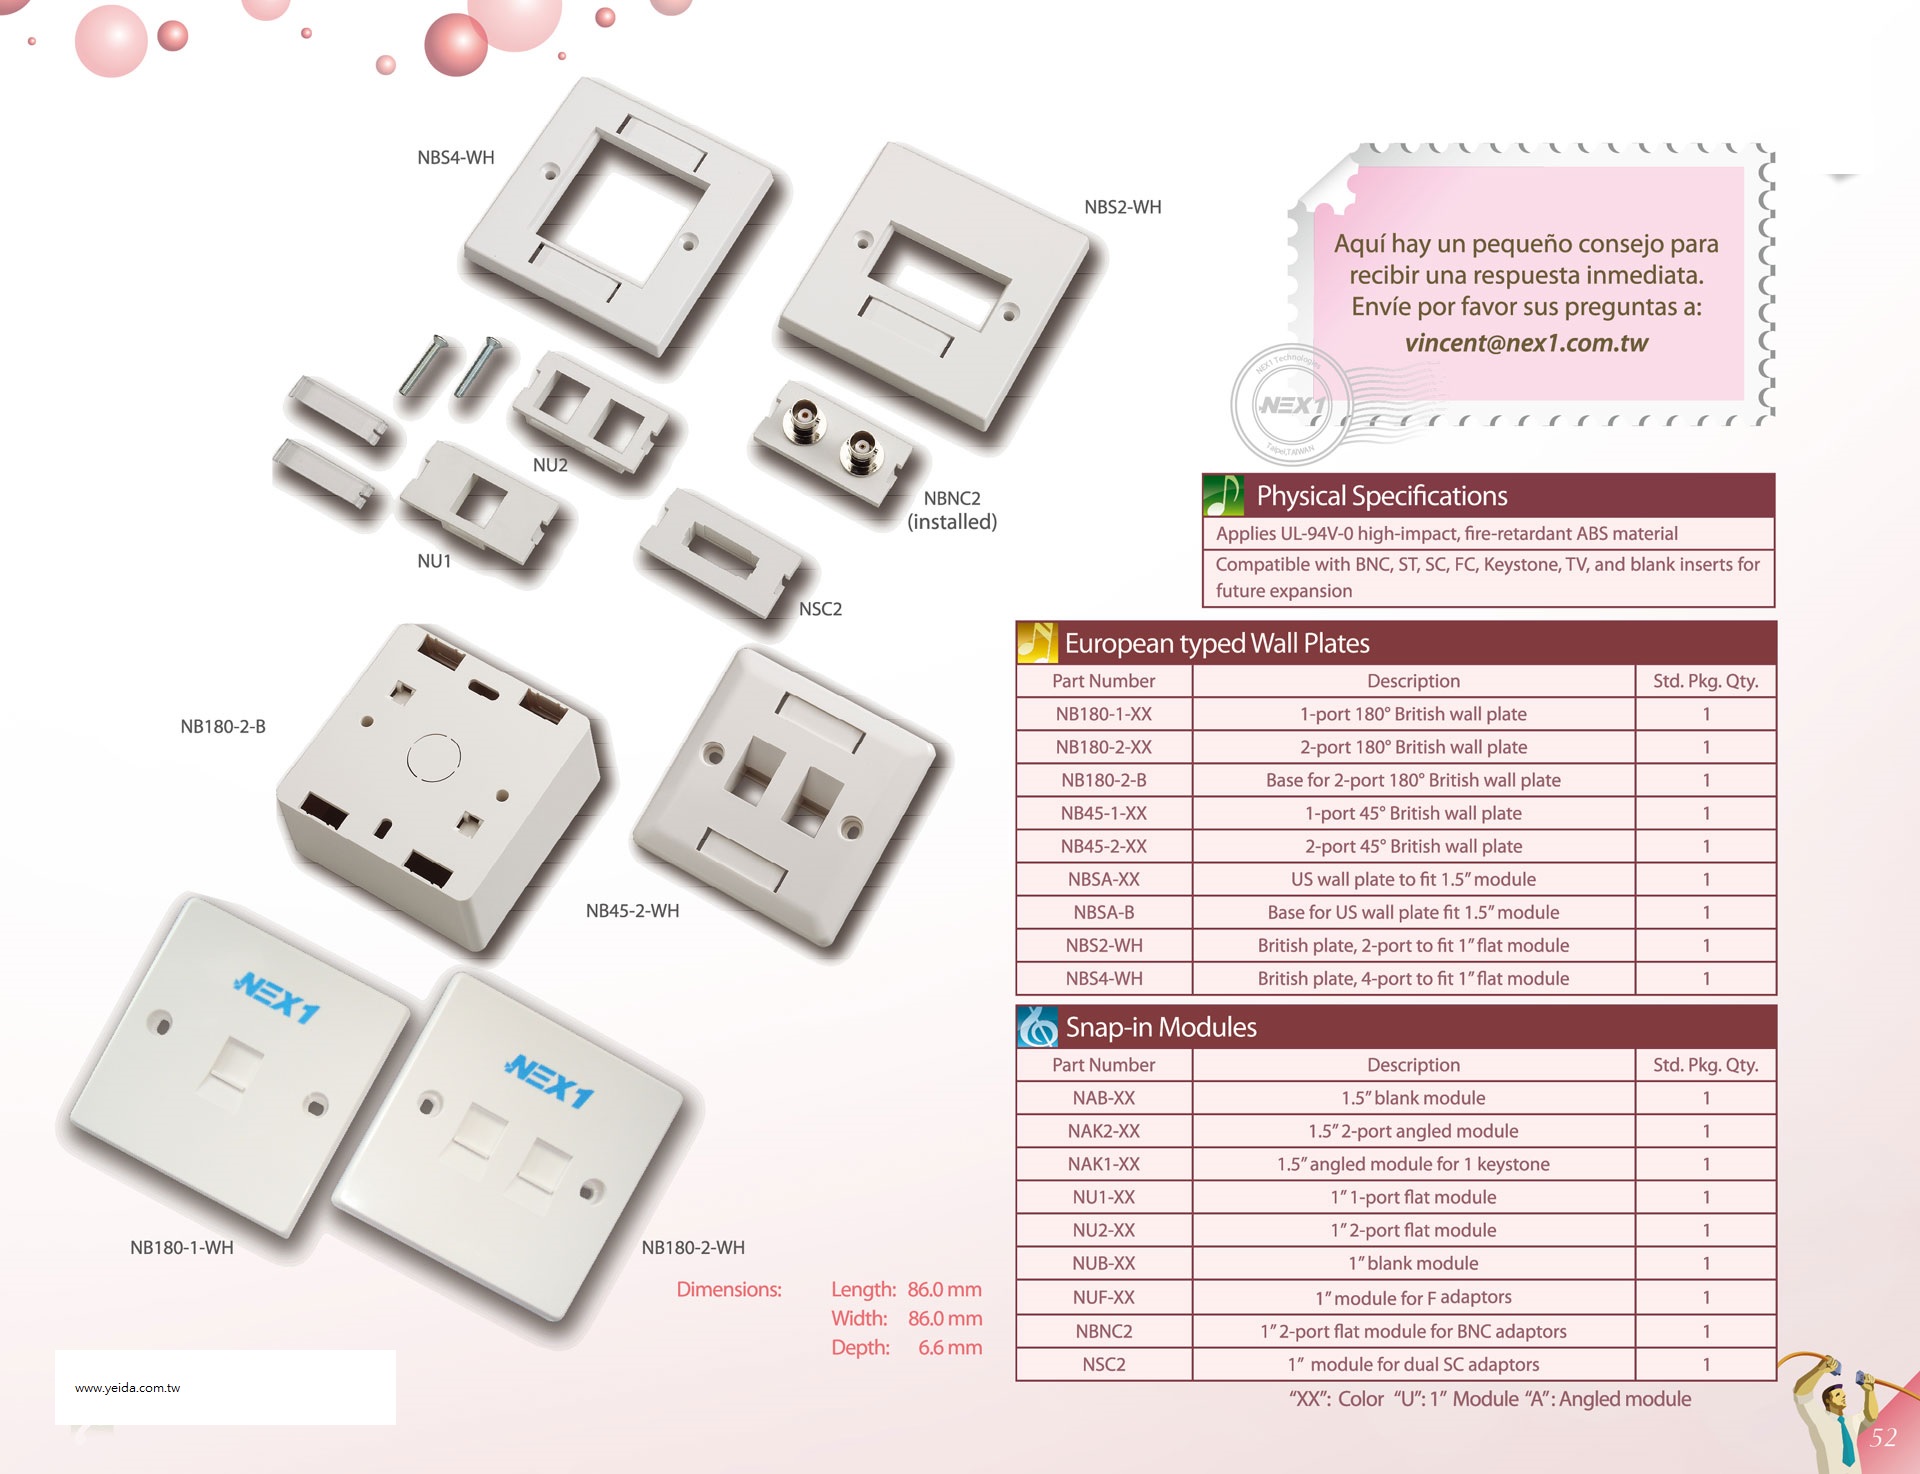 NEX-1 European typed wall plate specifications & ordering references歐規資訊盒面板